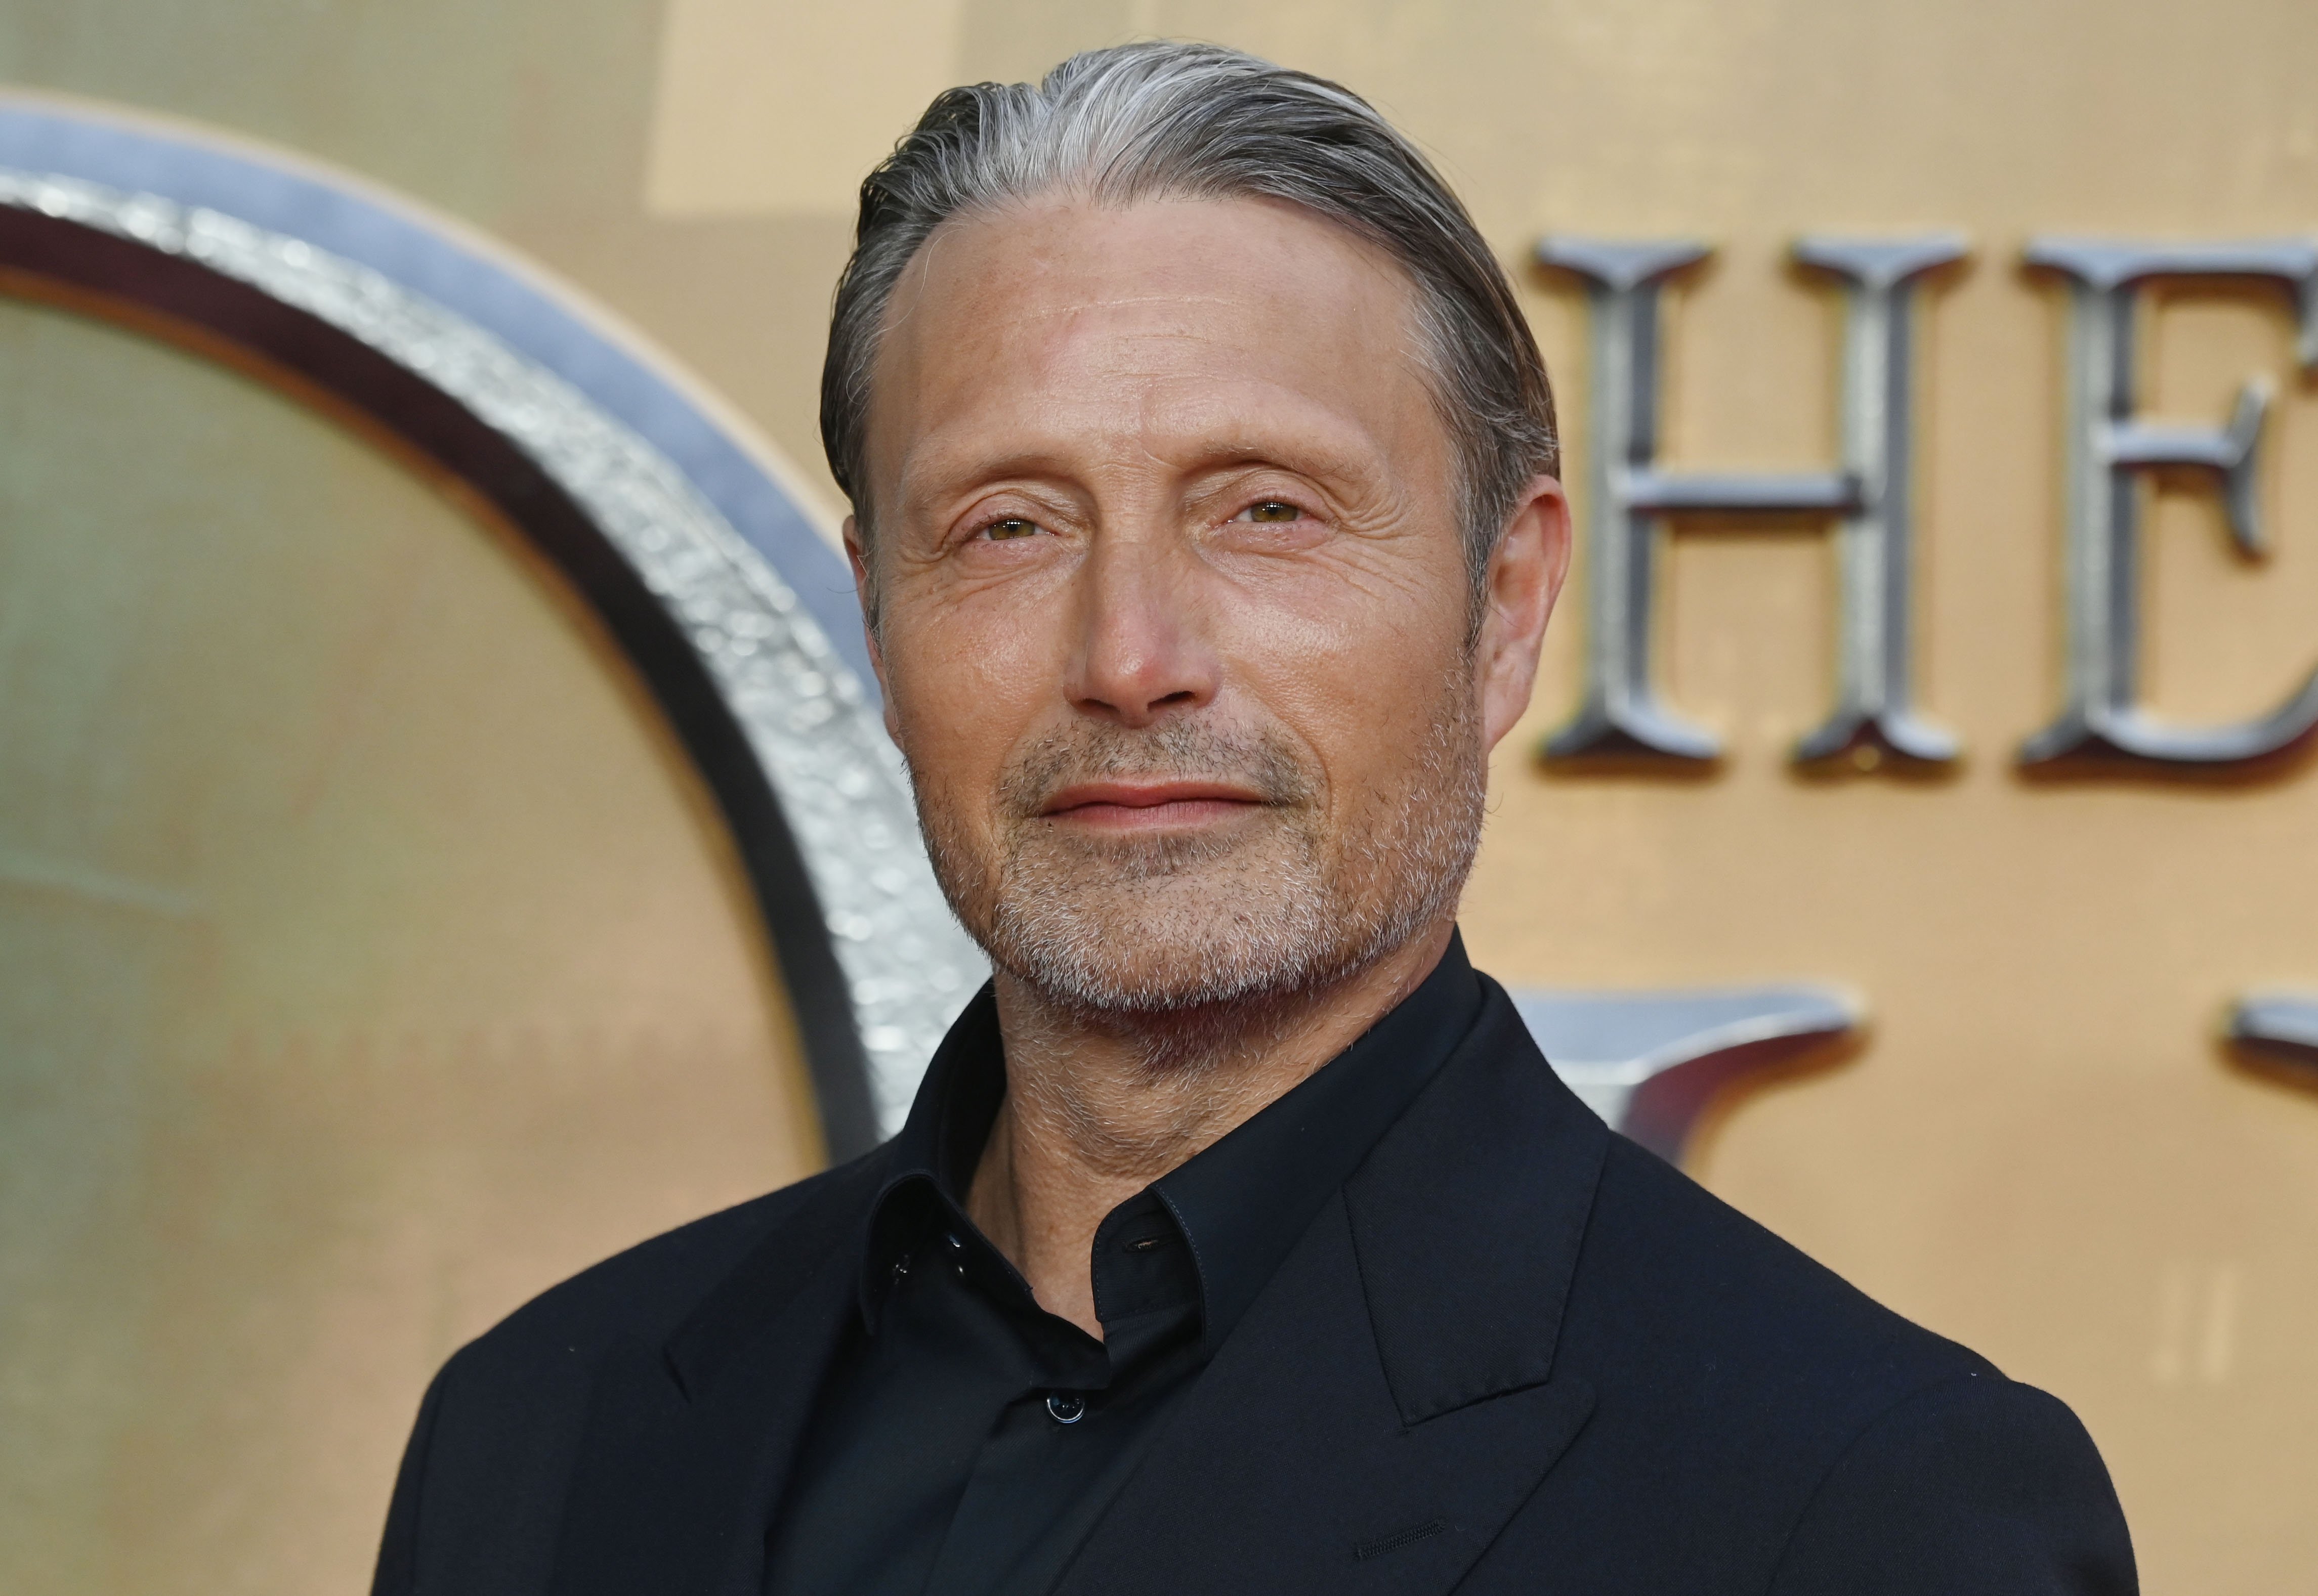 Mads Mikkelsen, who is taking over the role of Grindelwald from Johnny Depp, attends the premiere of Fantastic Beasts: The Secrets of Dumbledore